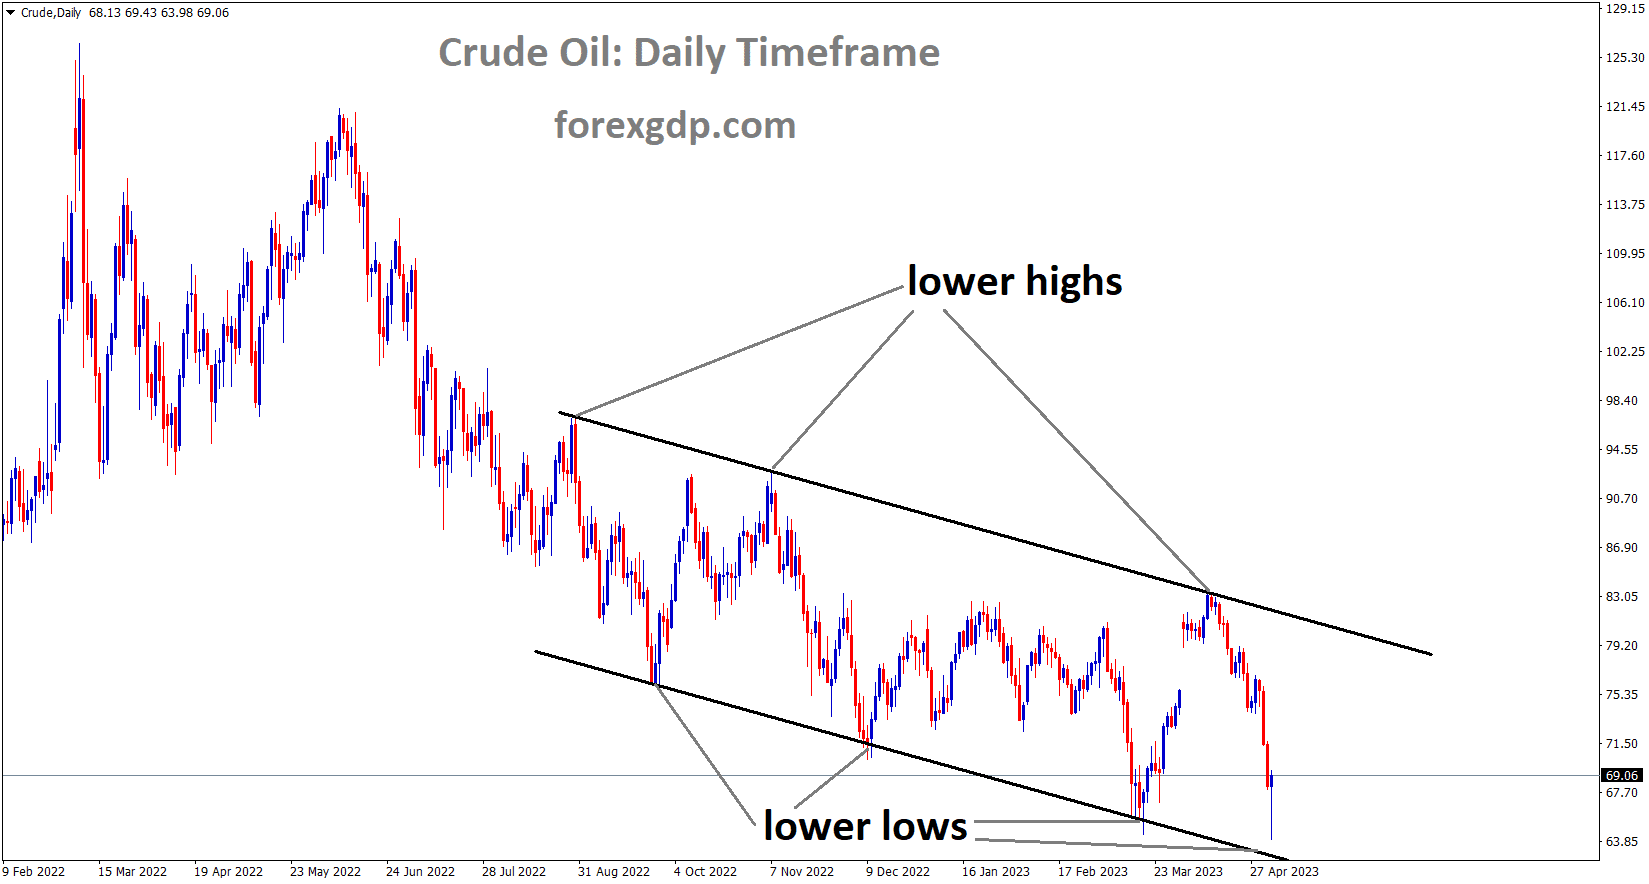 Crude Oil price is moving in the Descending channel and the market has reached the lower low area of the channel